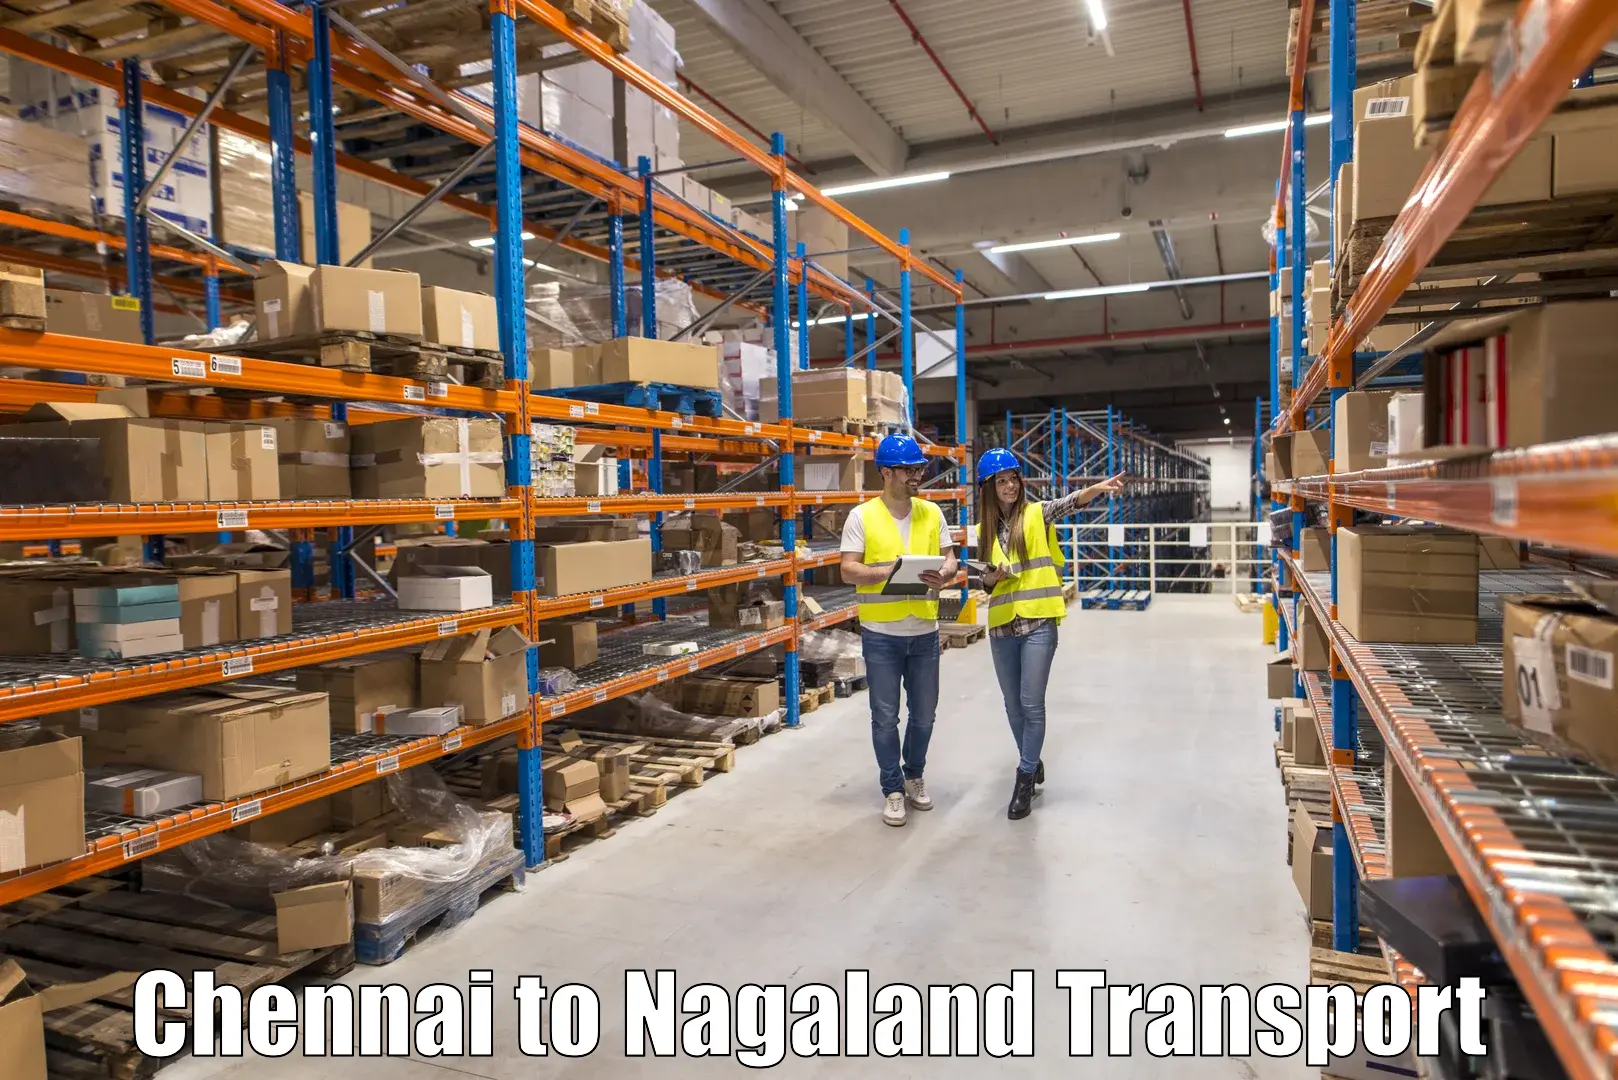 Express transport services in Chennai to Nagaland